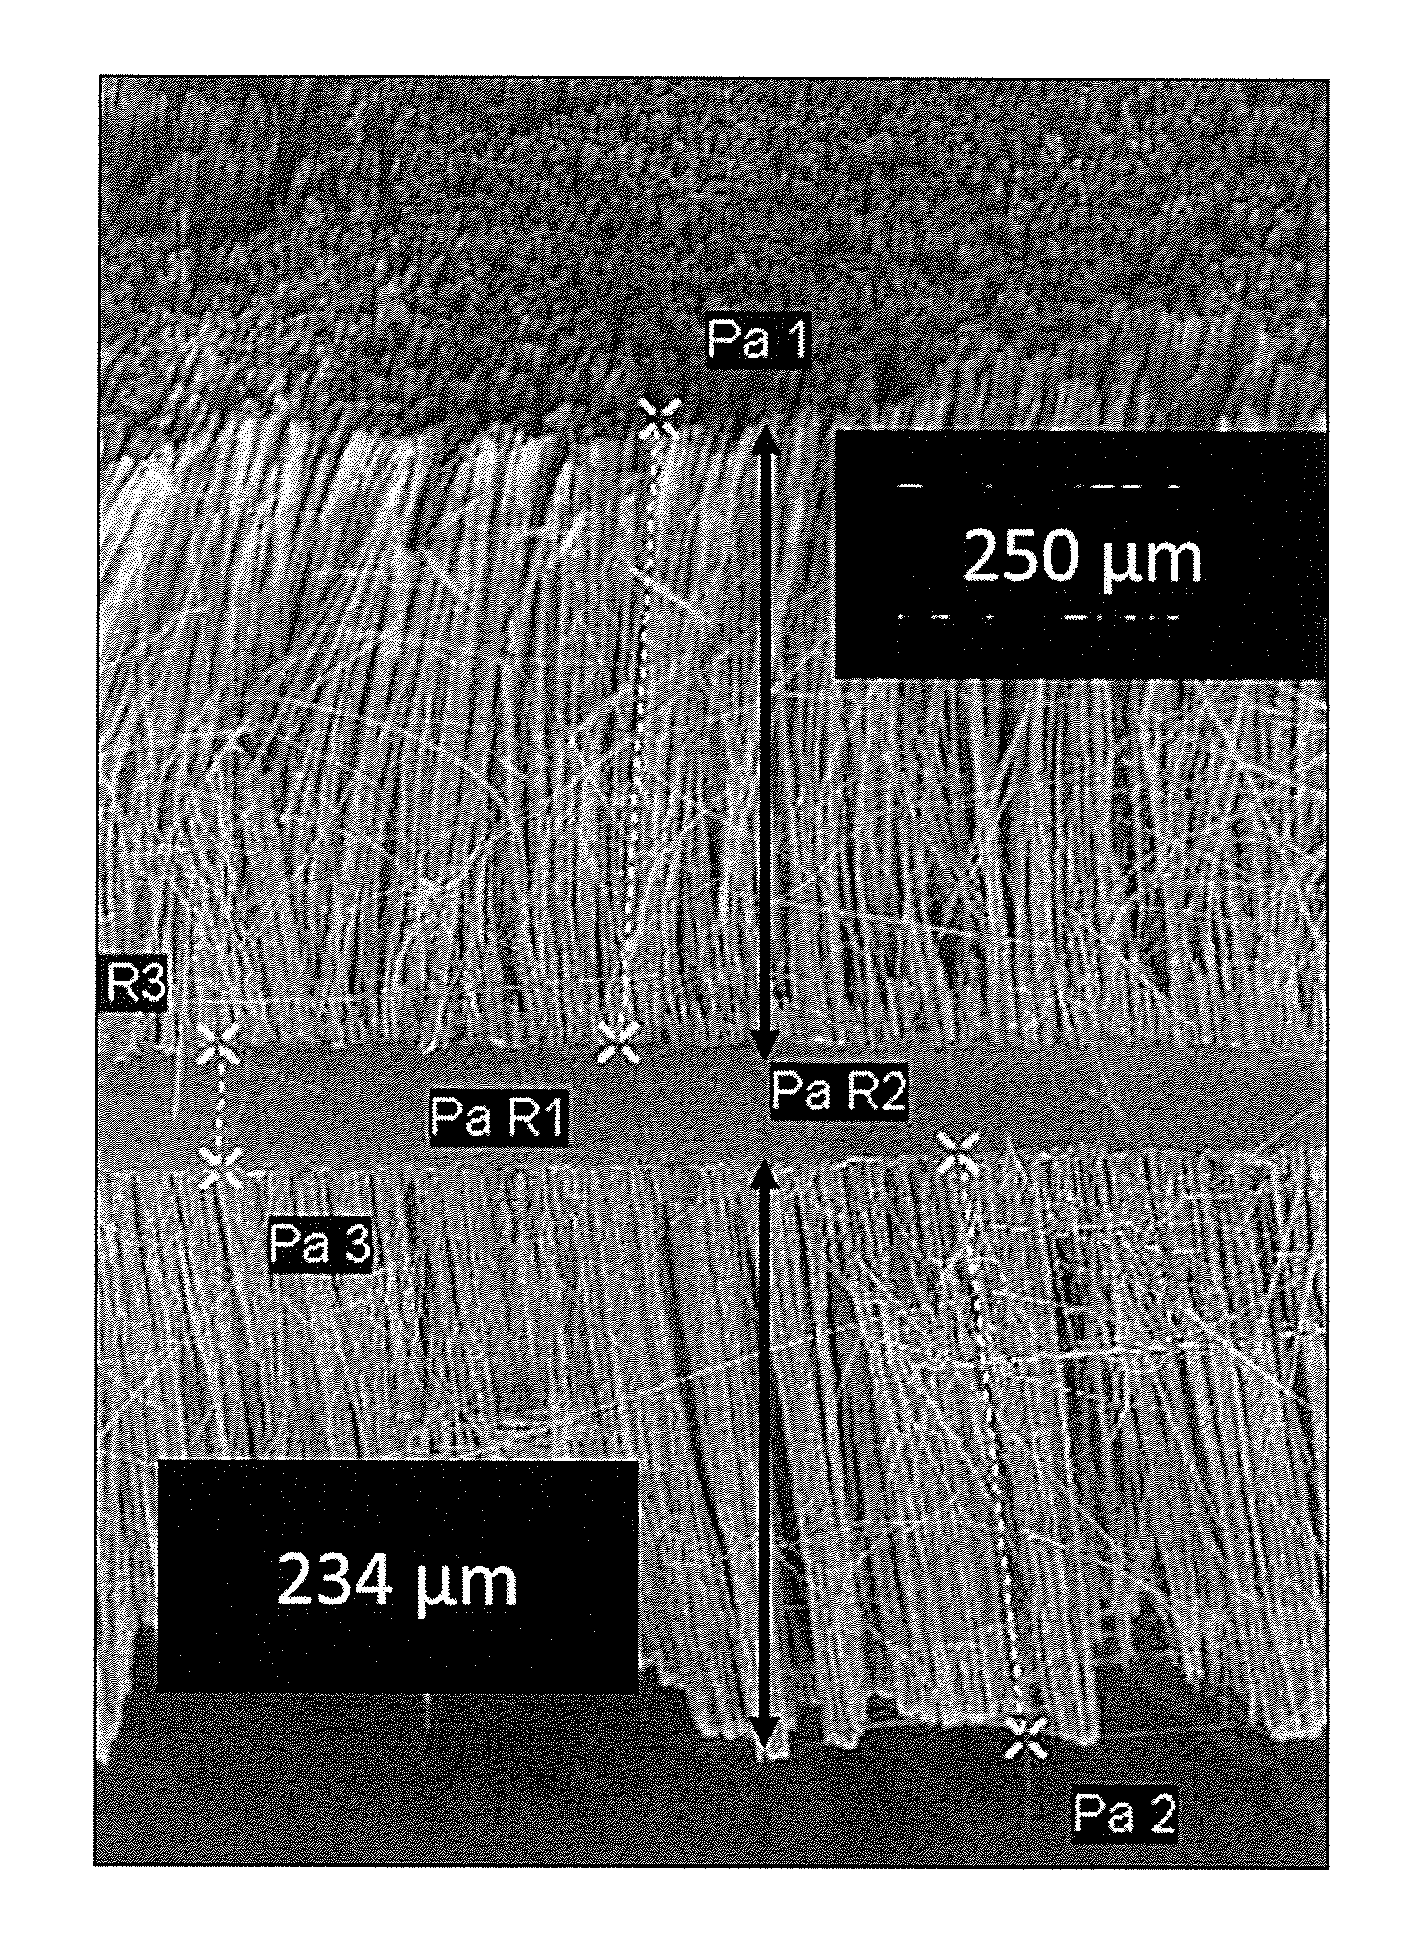 Arrays of long nanostructures in semiconductor materials and methods thereof